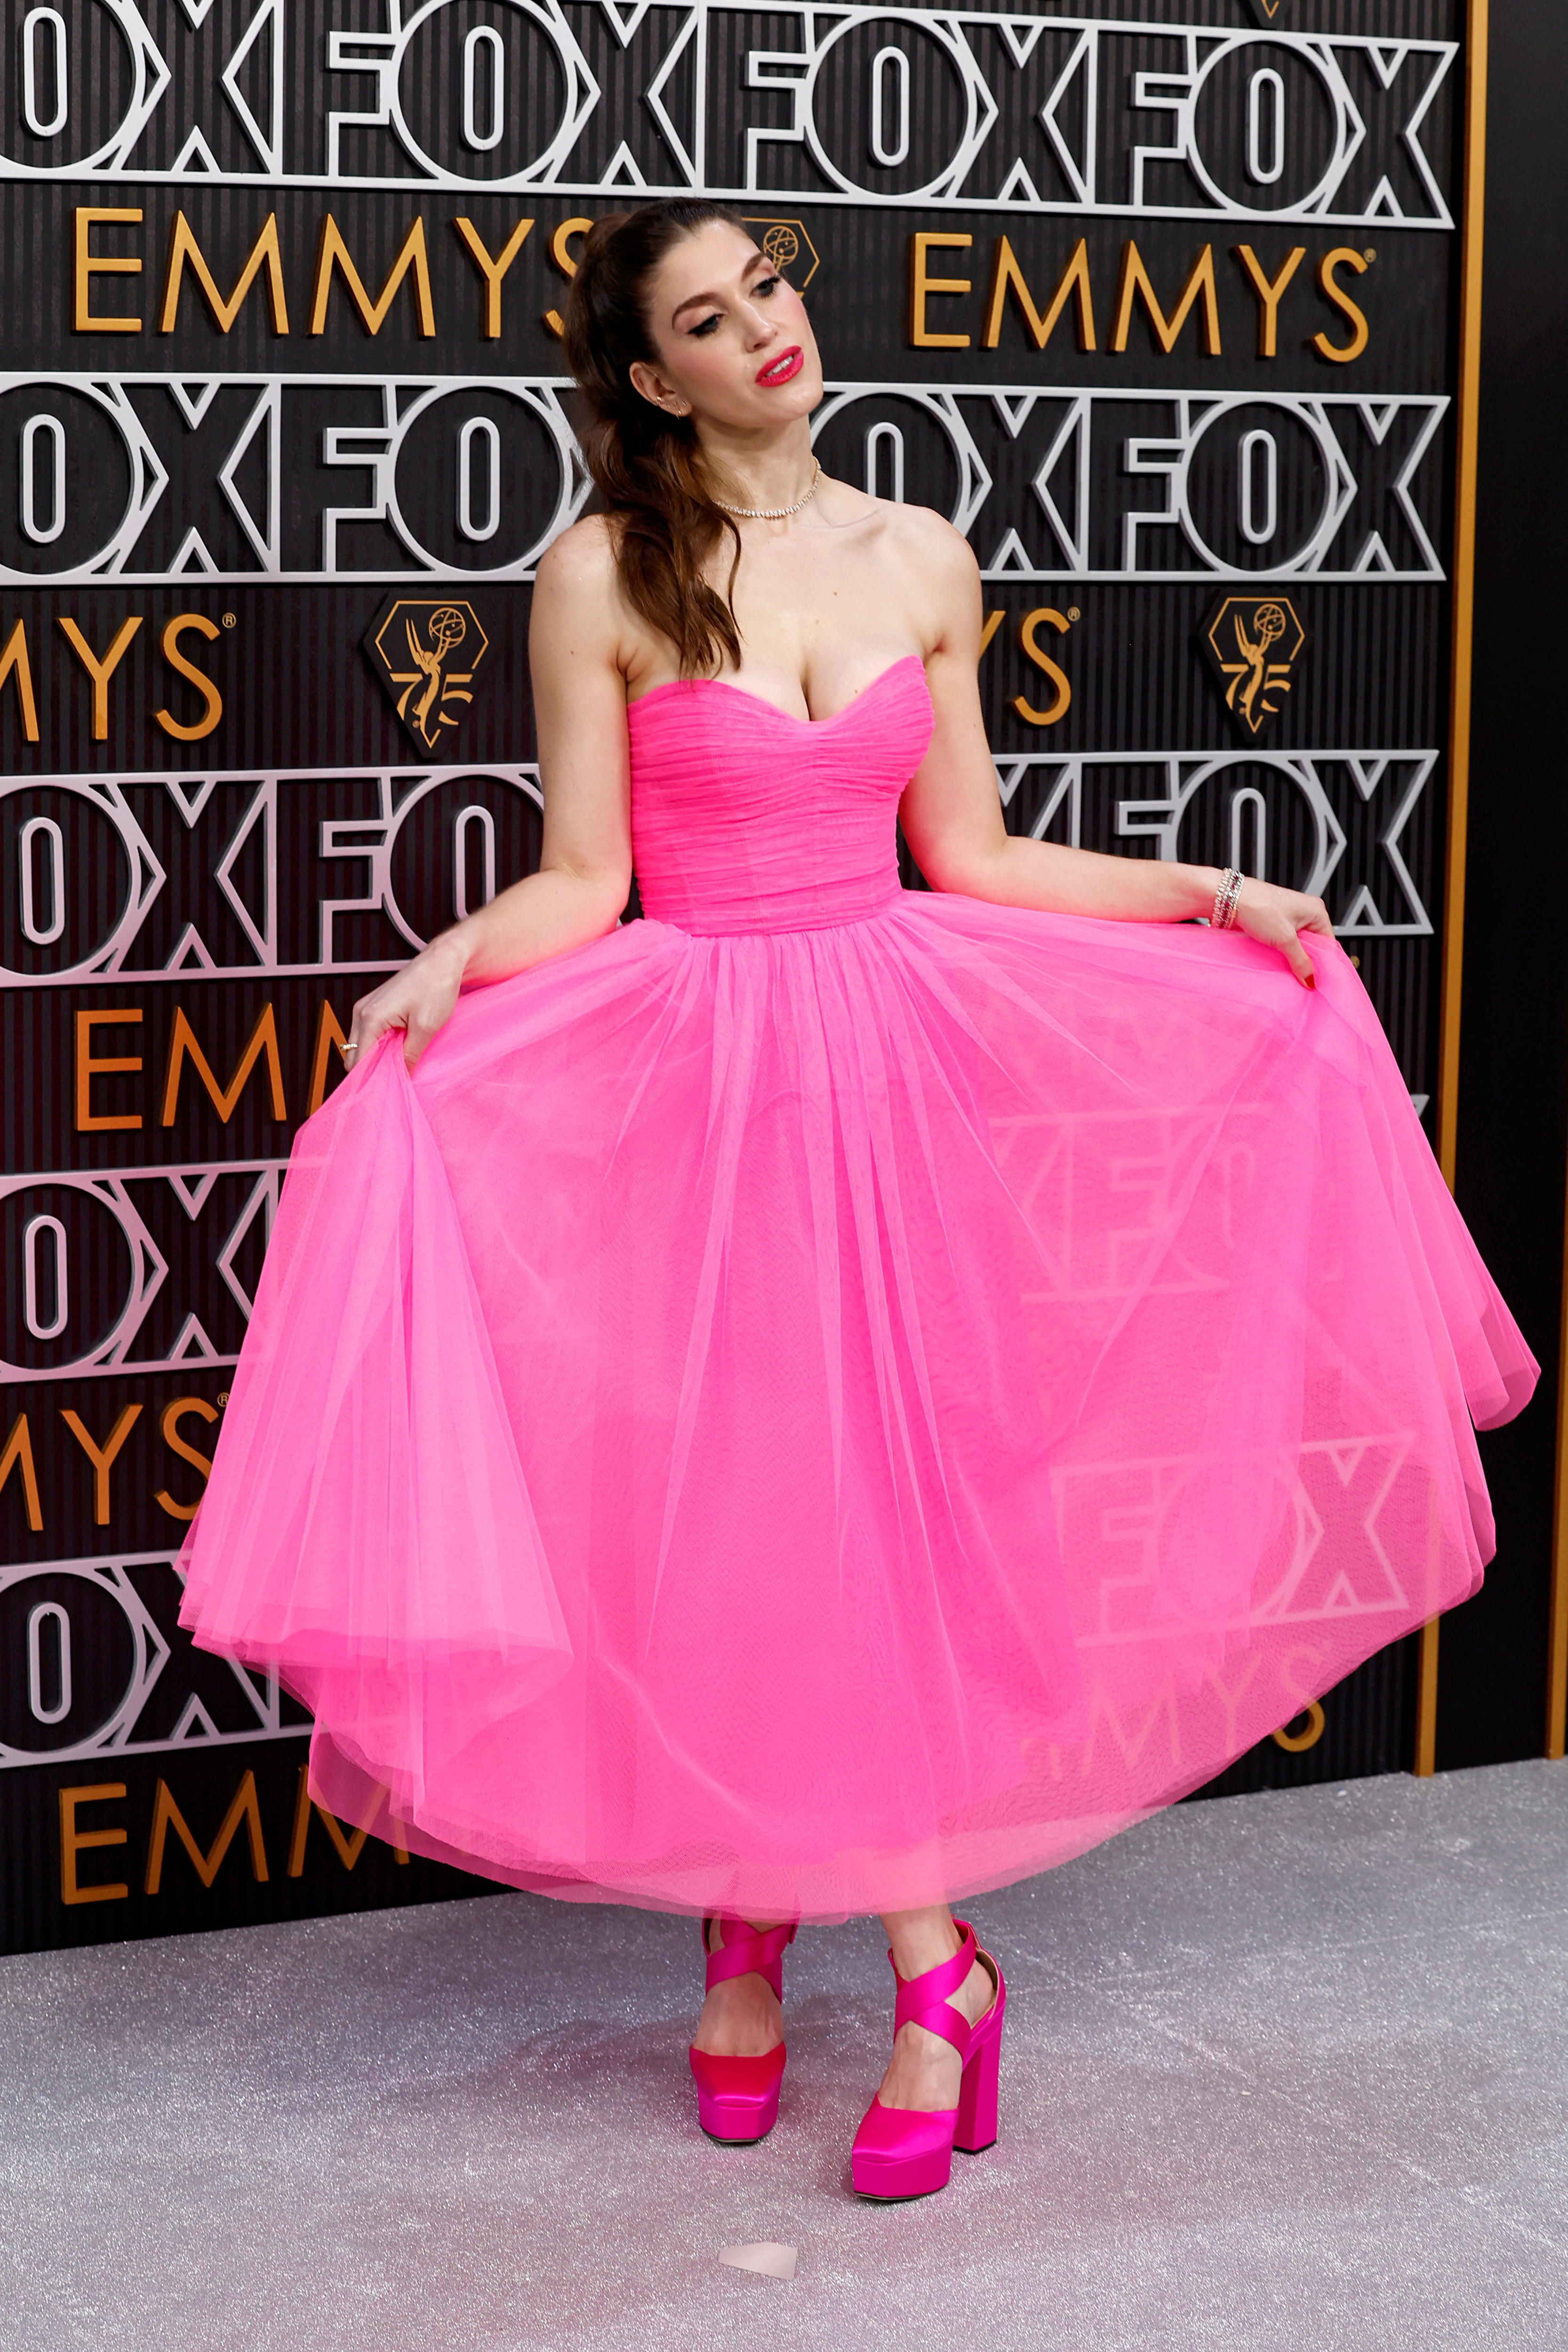 A women in a hot pink dress on a red carpet